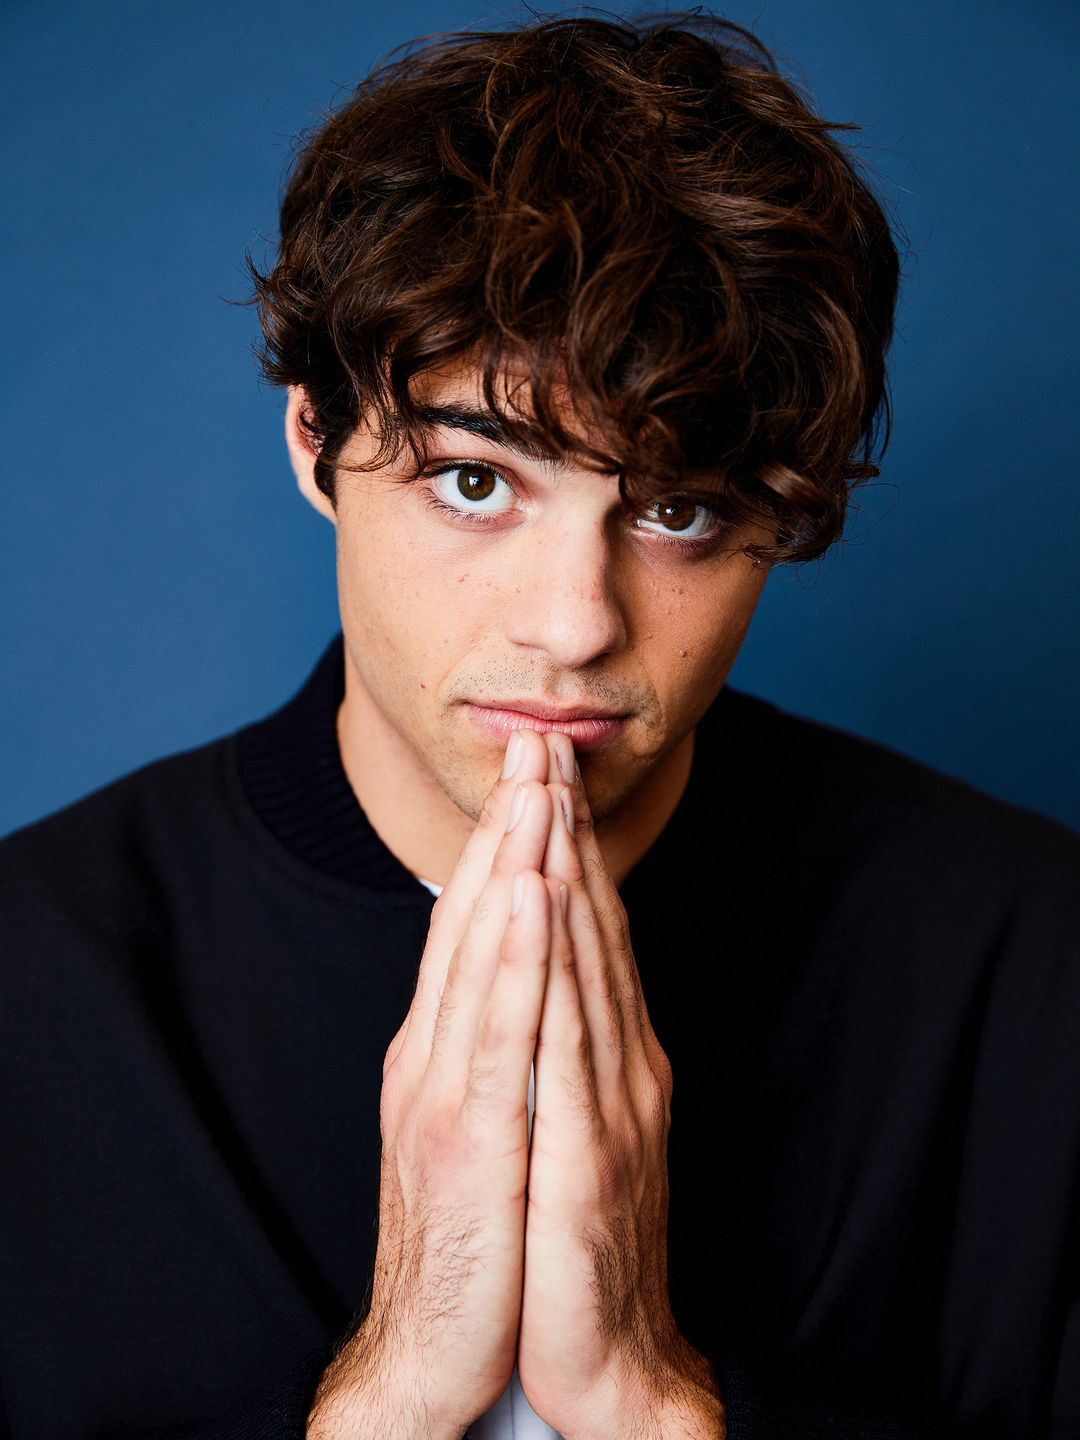 Noah Centineo does he have kids